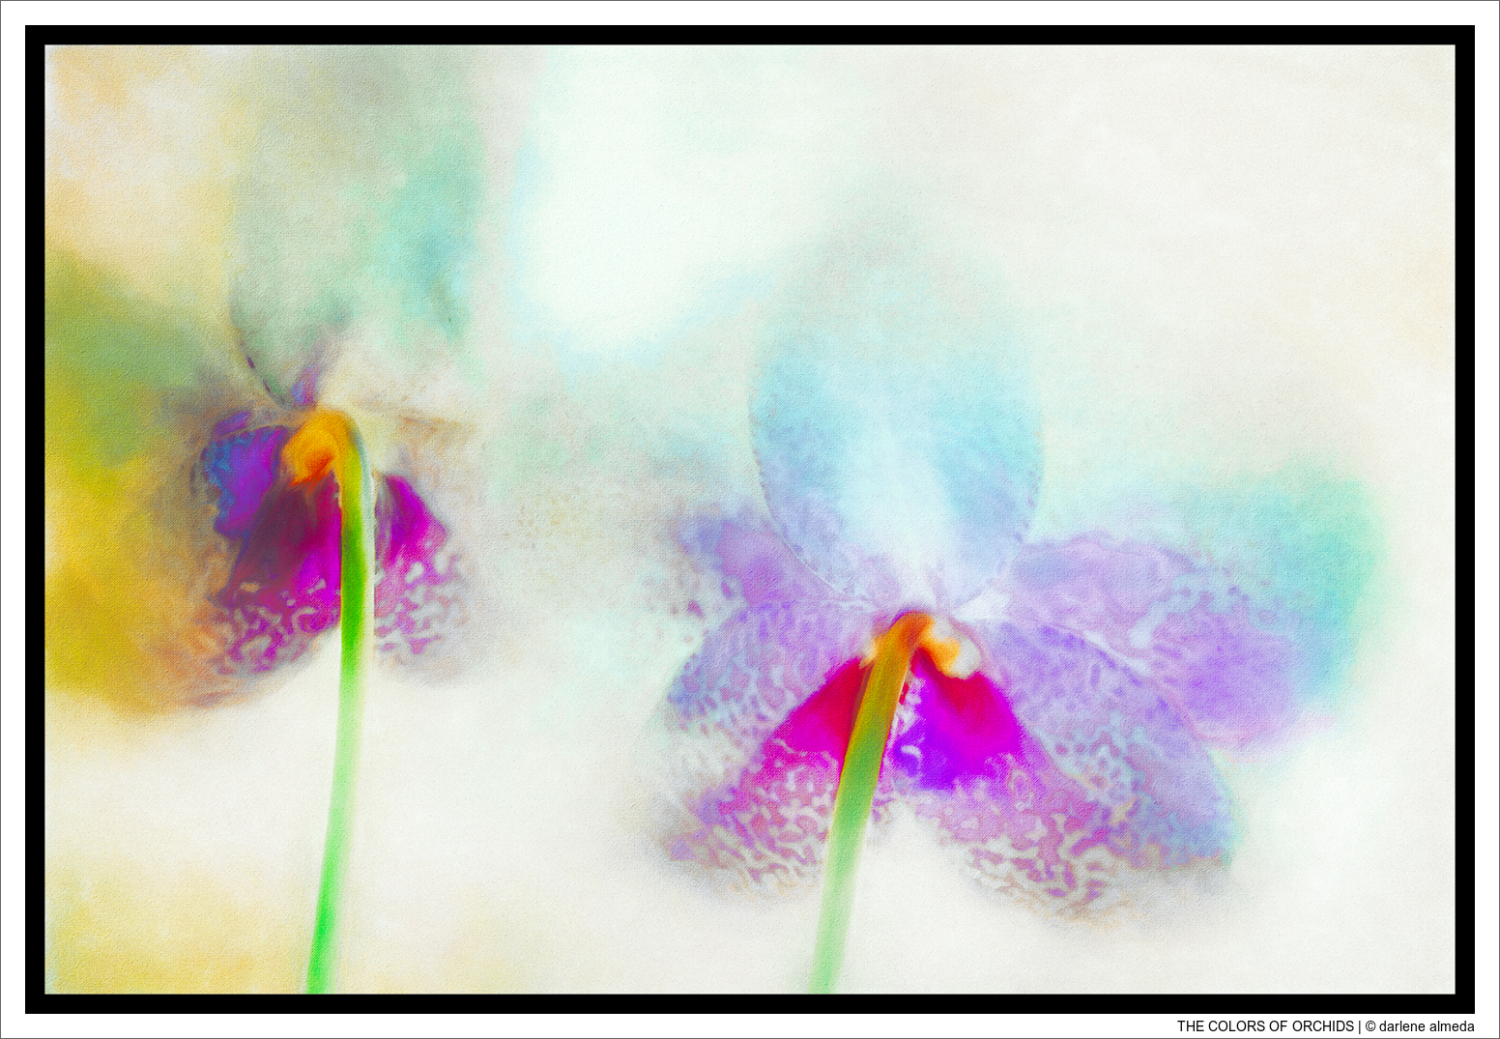 THE COLORS OF ORCHIDS